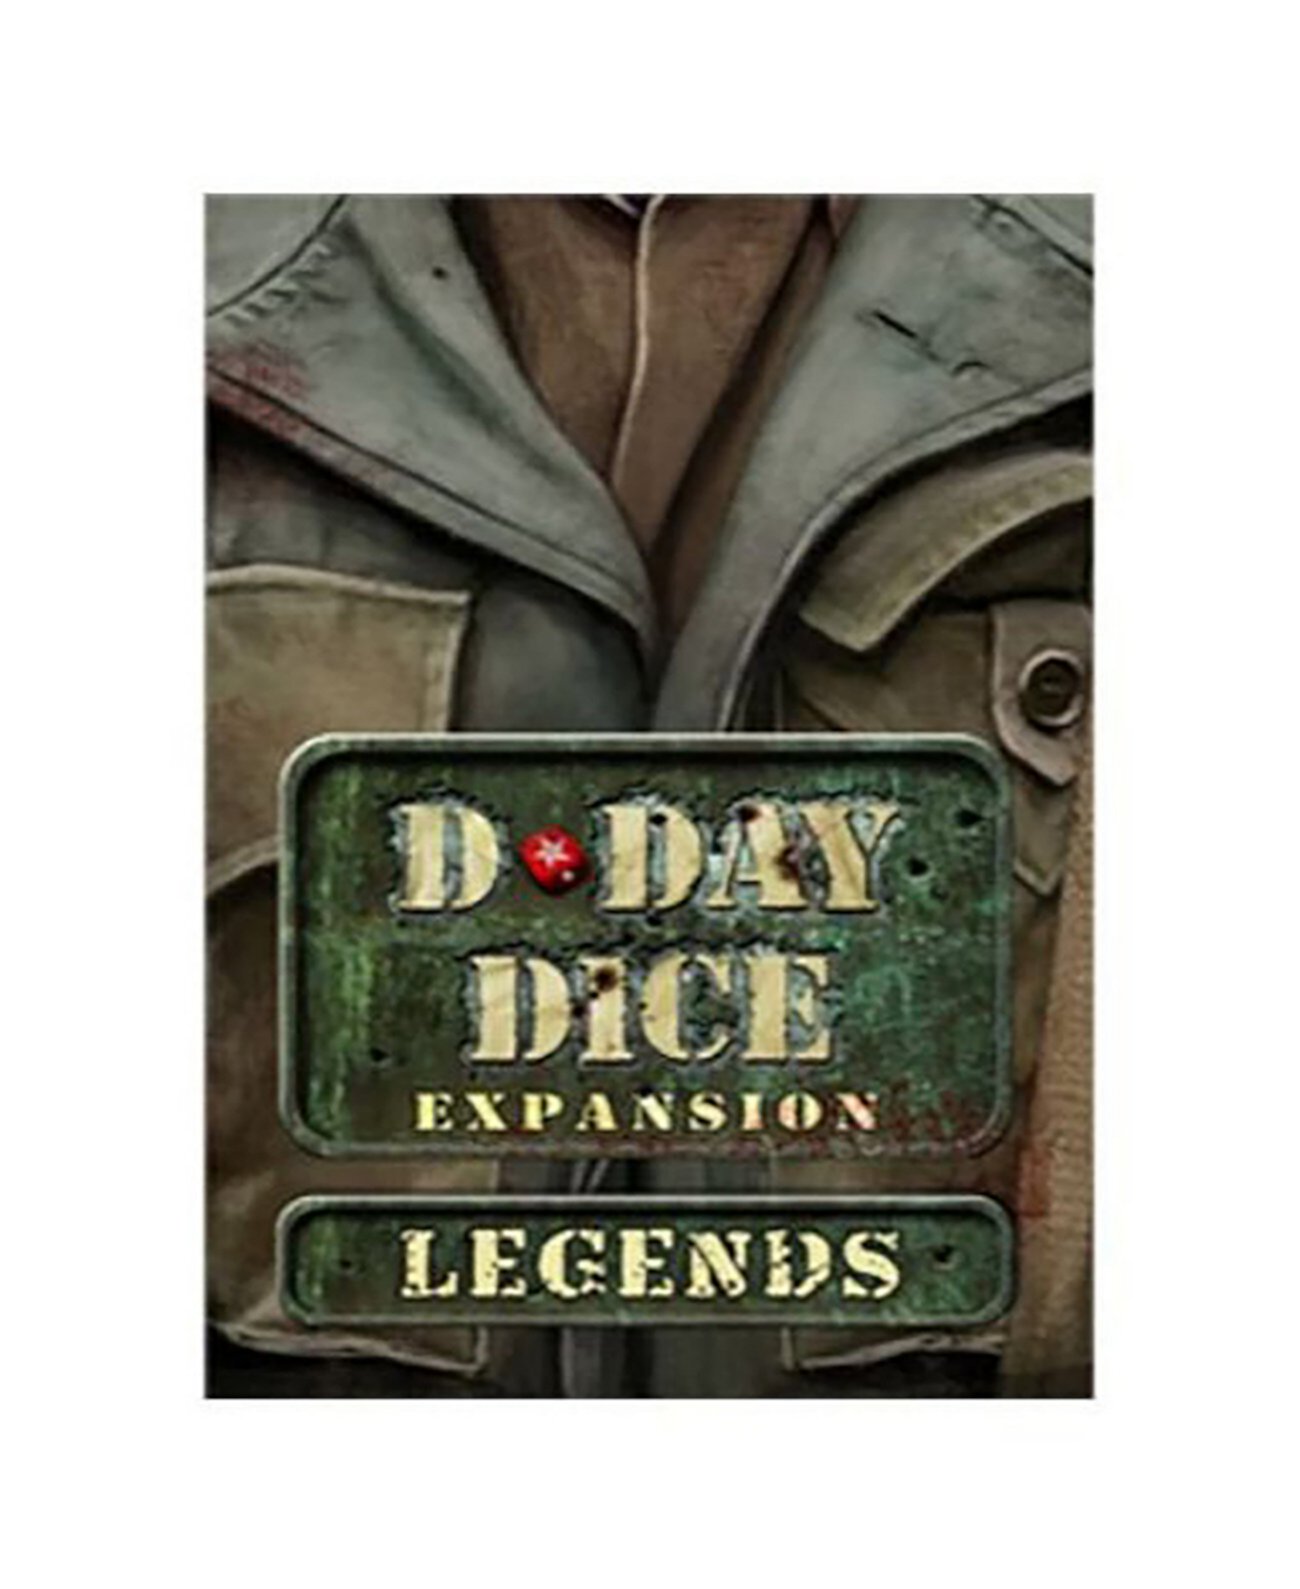 D-Day Dice Legends Expansion, 70 штук Word Forge Games